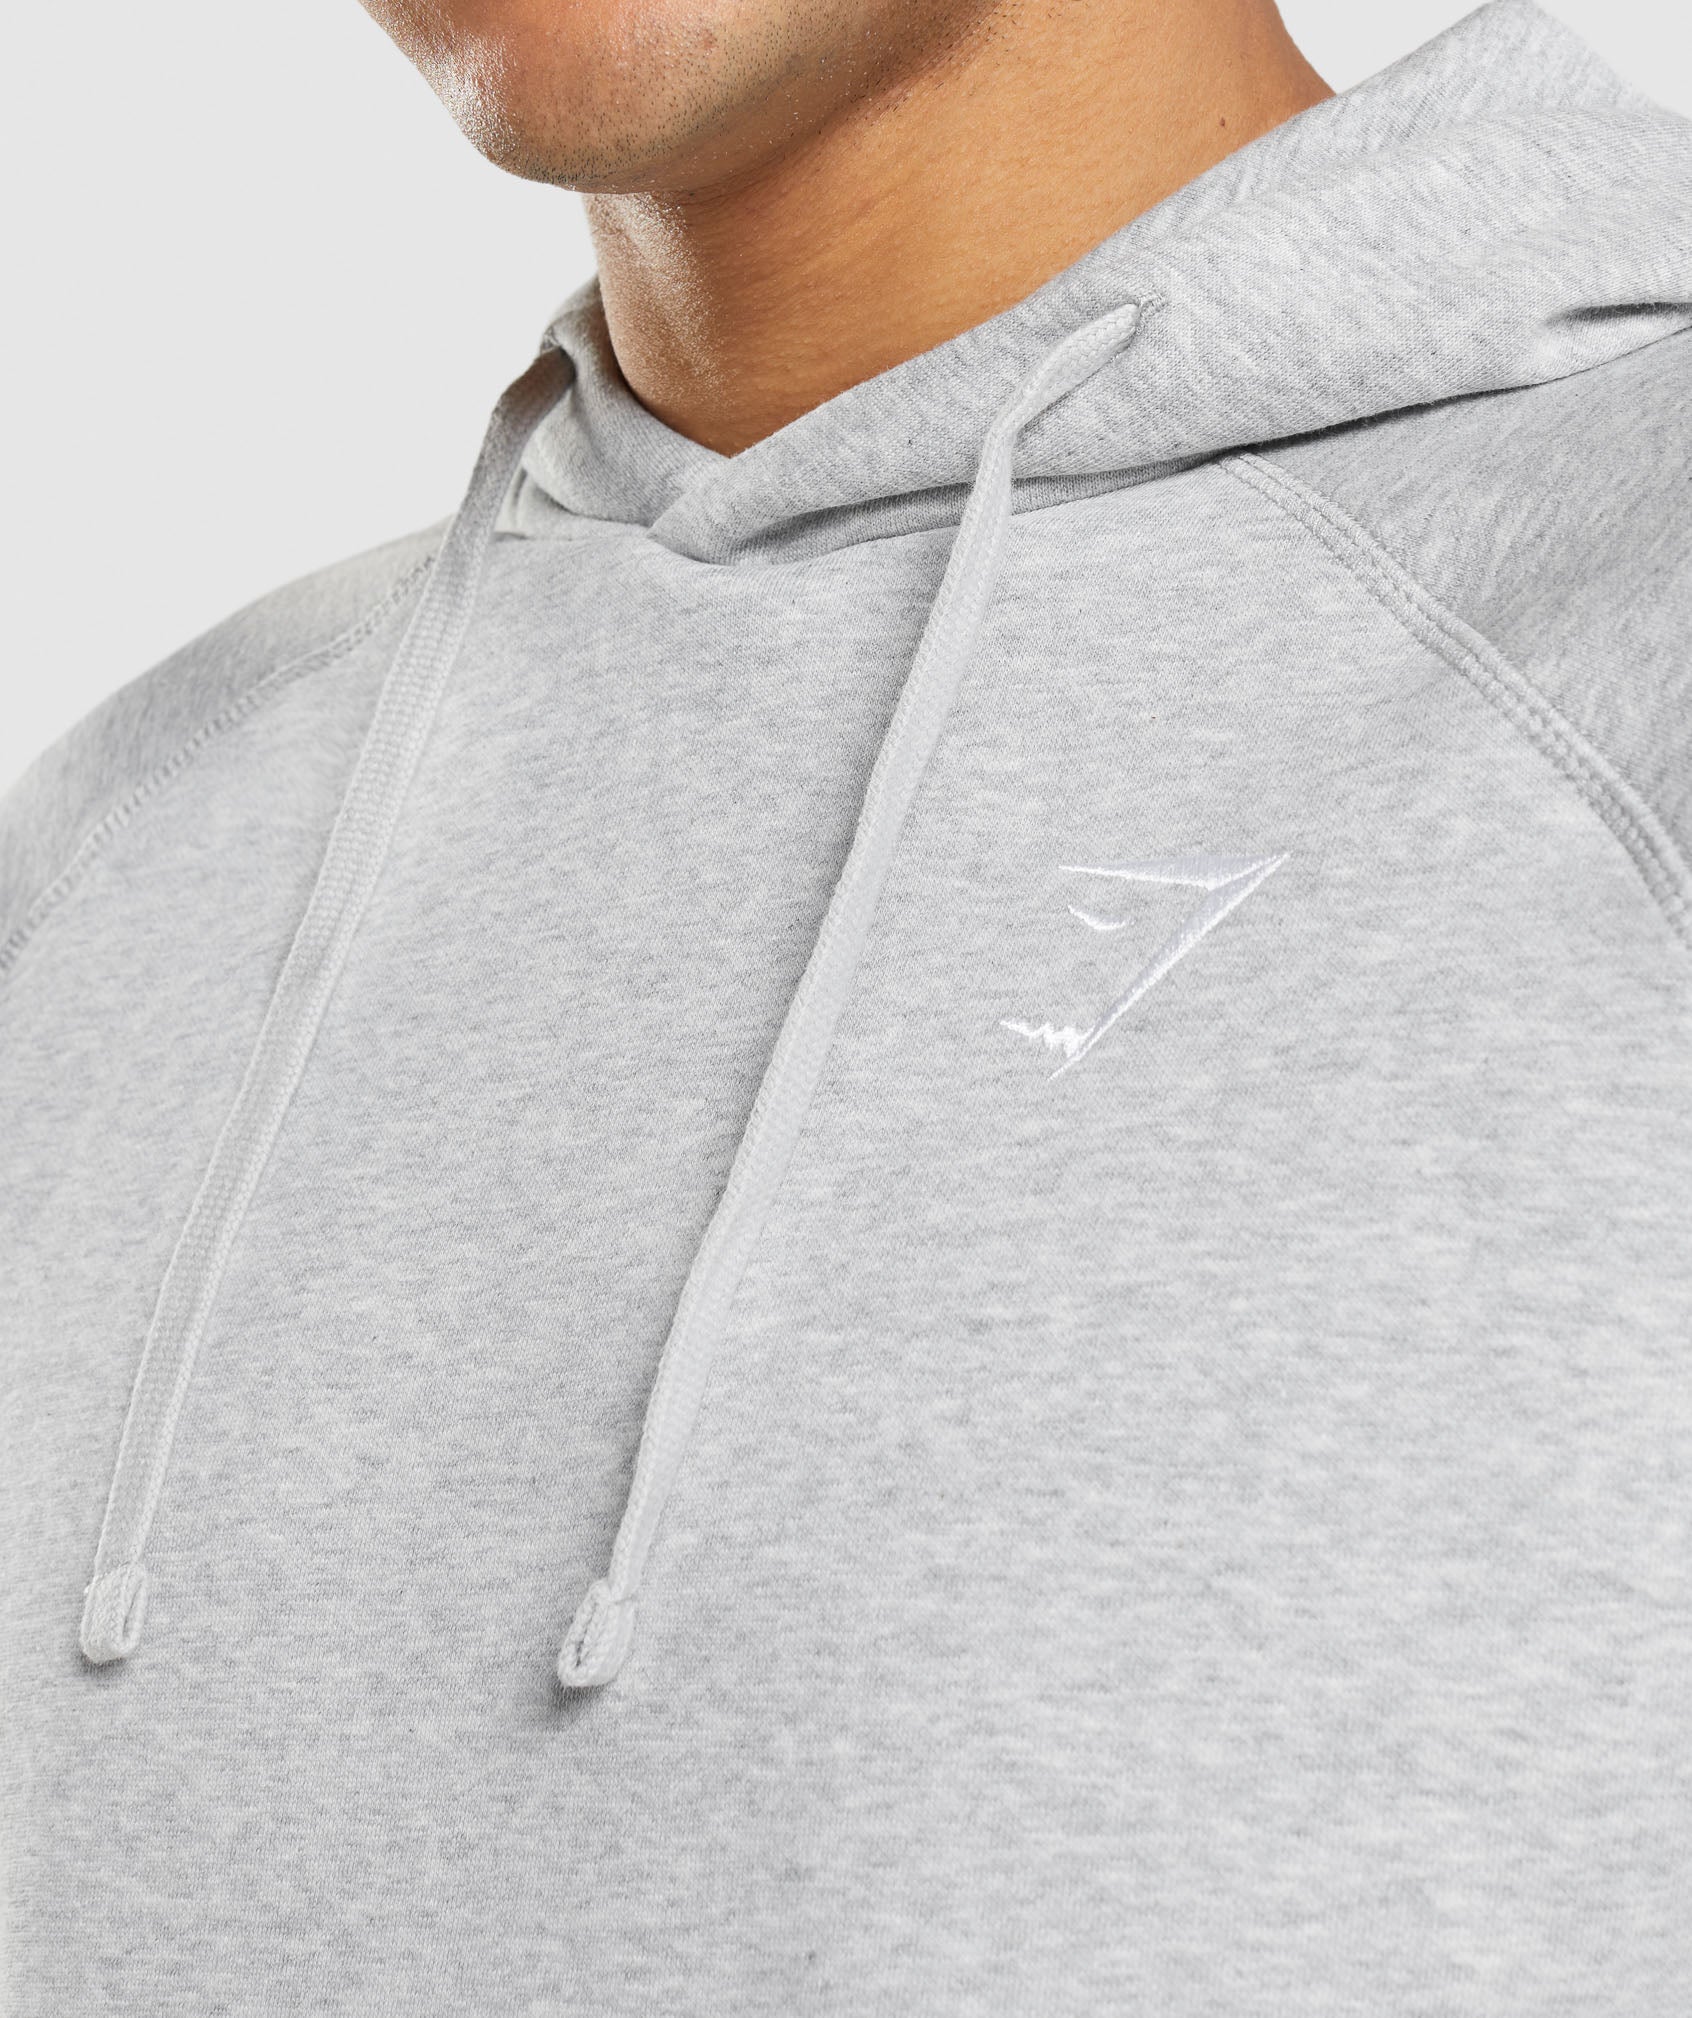 Crest Hoodie product image 5